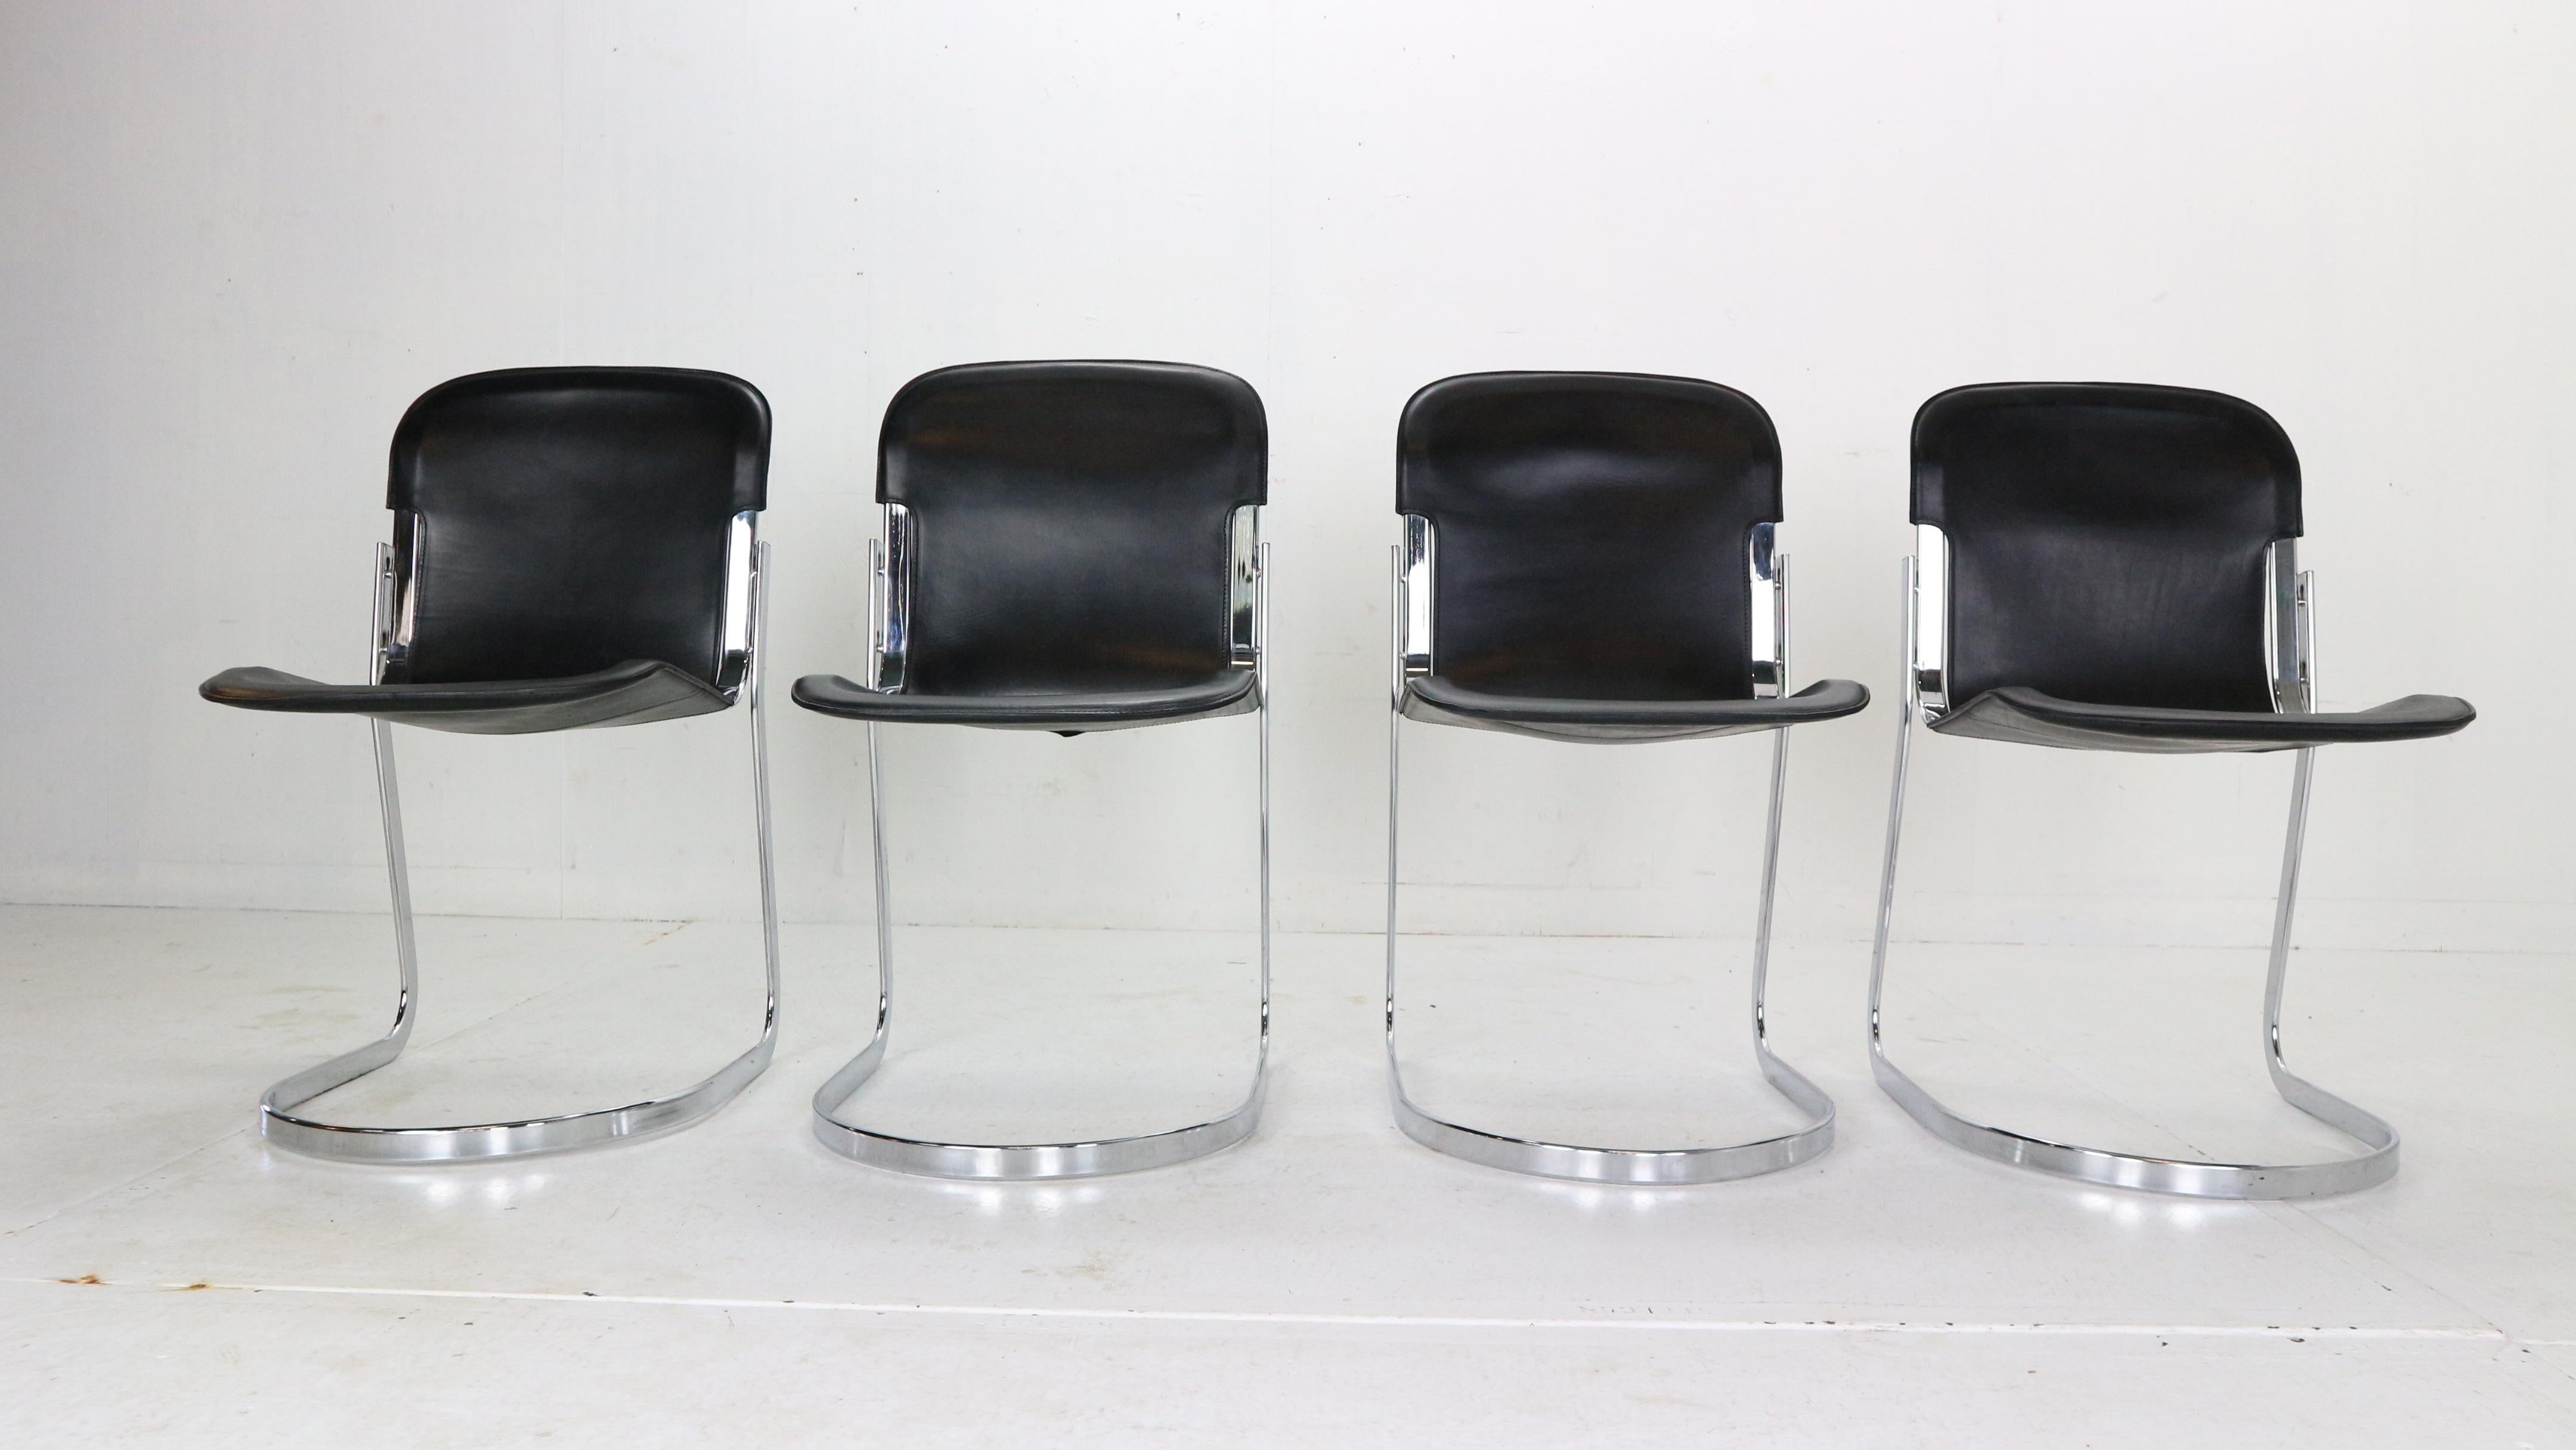 Set of four dinning room chairs designed by Willy Rizzo and manufactured by Cidue in 1970's period Italy. 
Model No: C2.
These cantilever chairs have a flat chromed tubular steel frame and are covered with high quality Italian black saddle